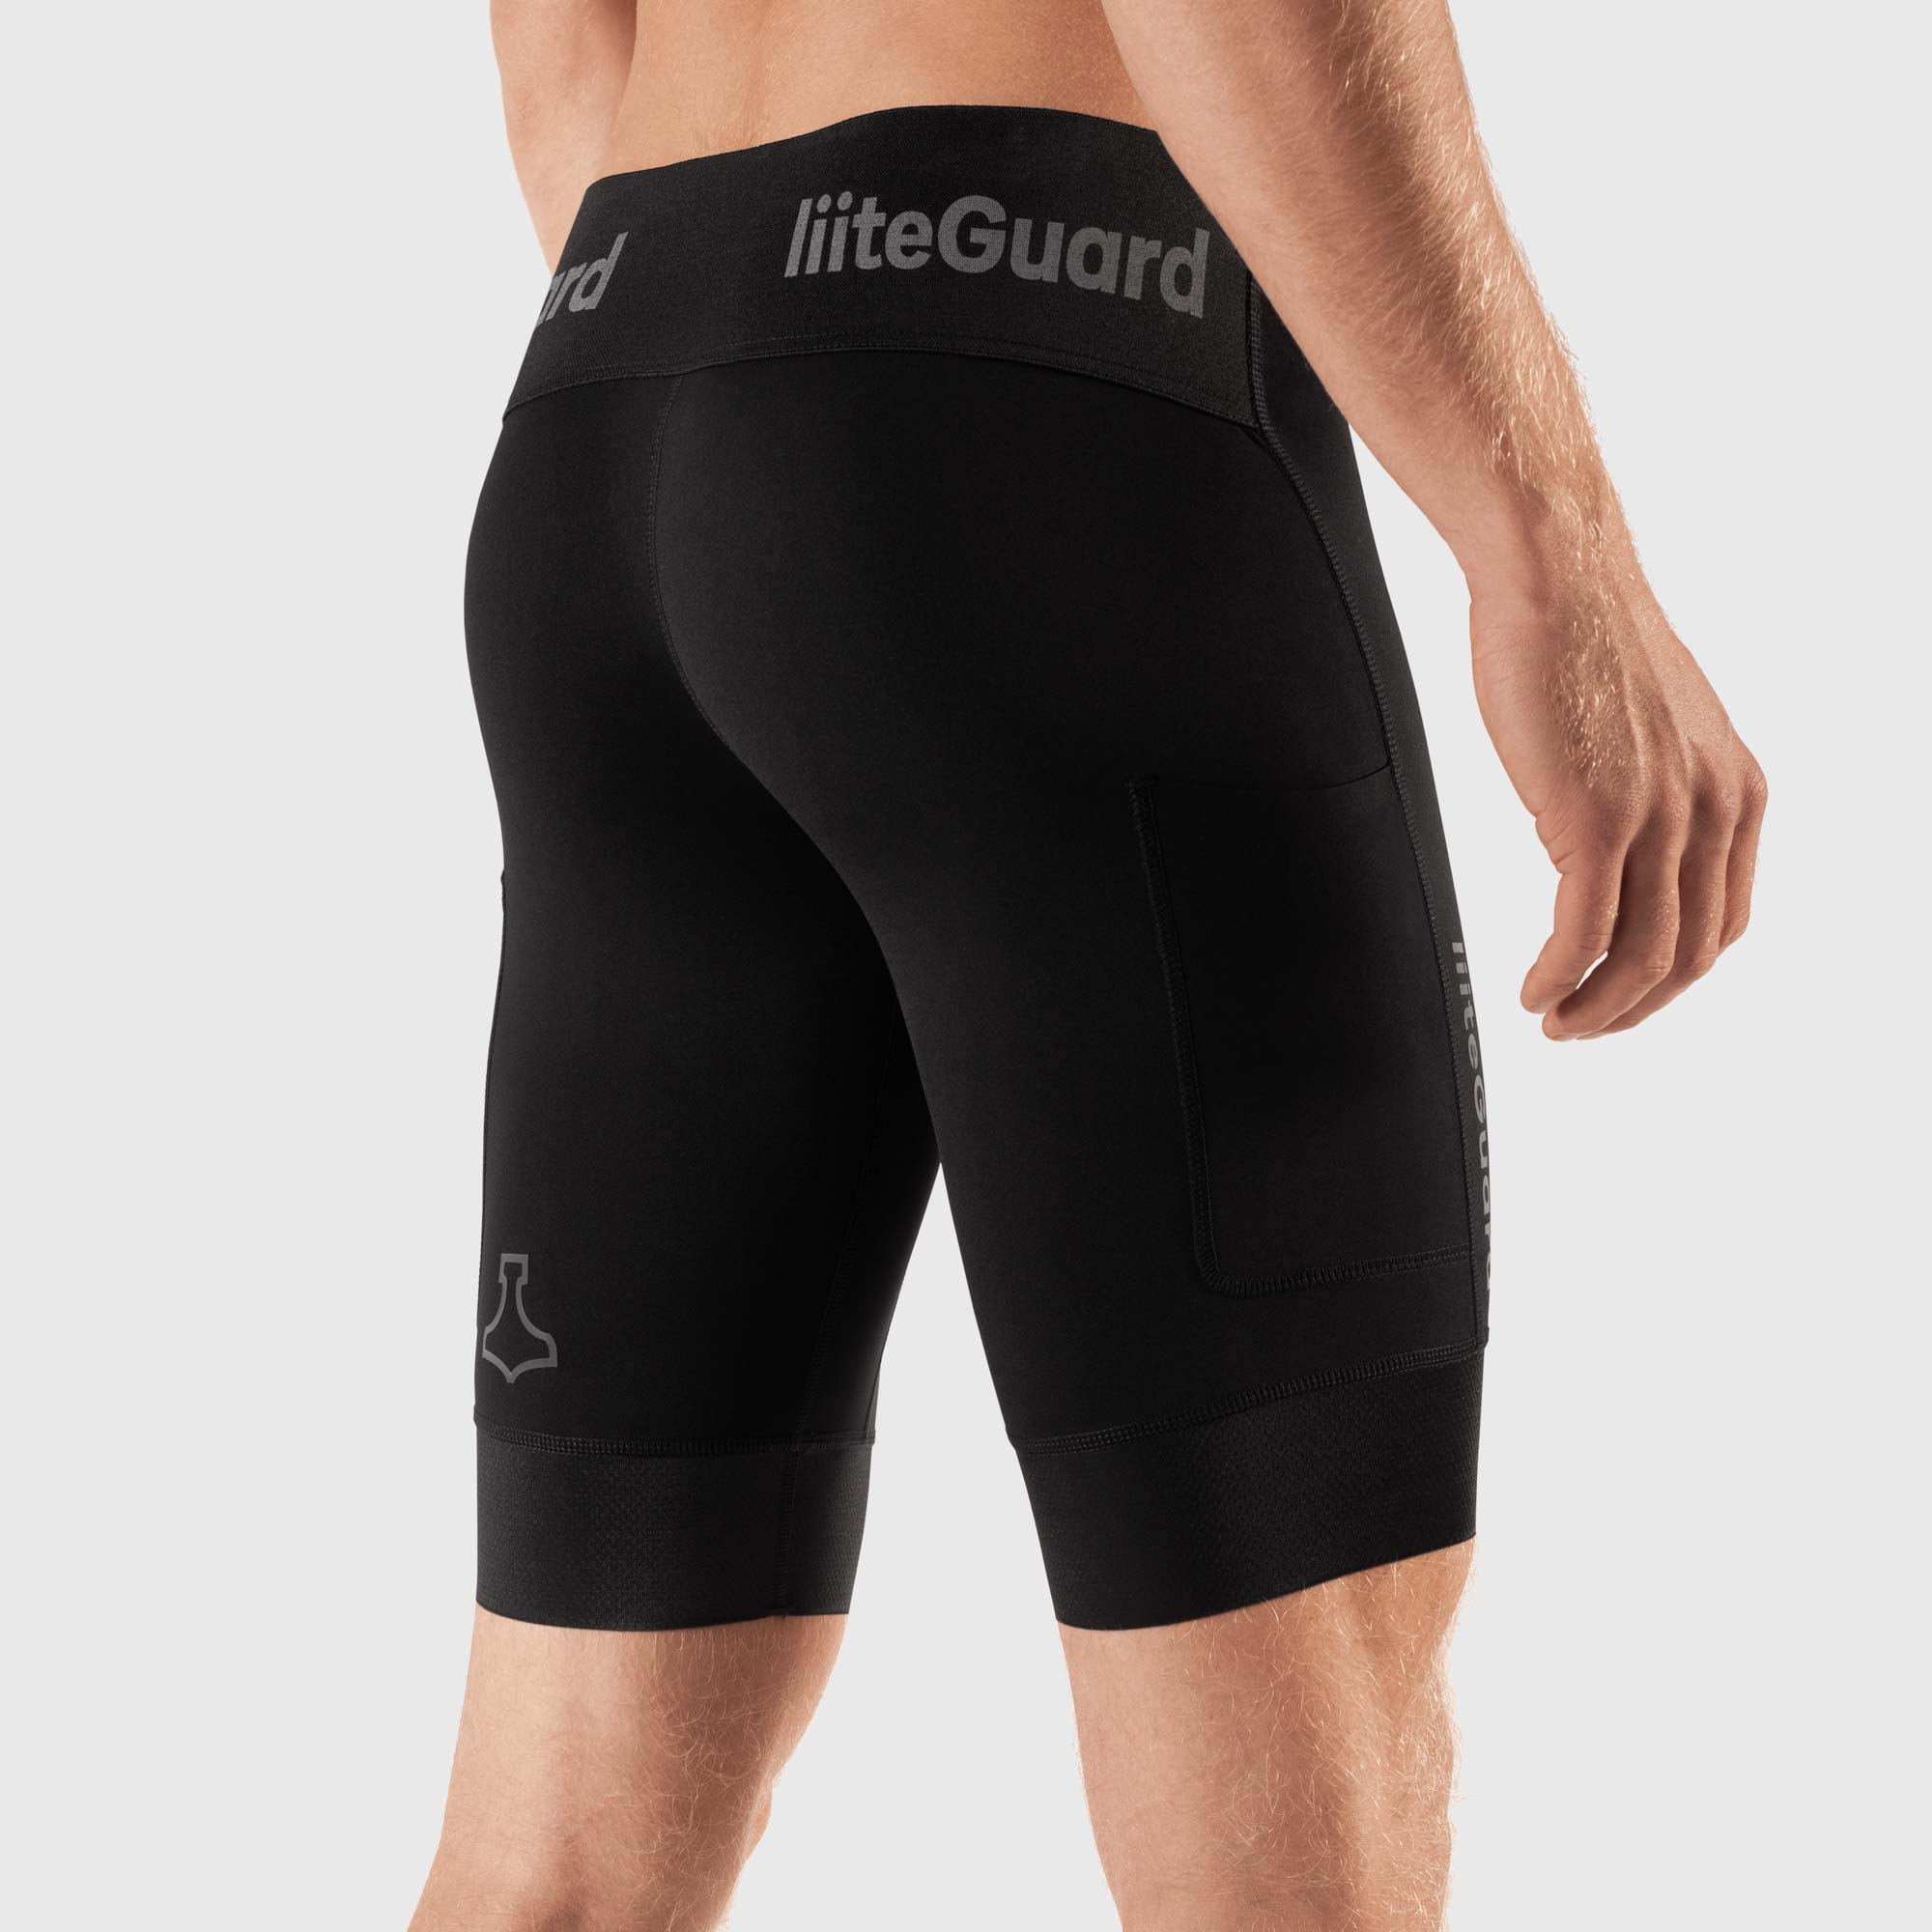 JOBST Confidence: Compression tights with no groin seam - Lipedema Mode  (soon: POWER SPROTTE - The Blog)